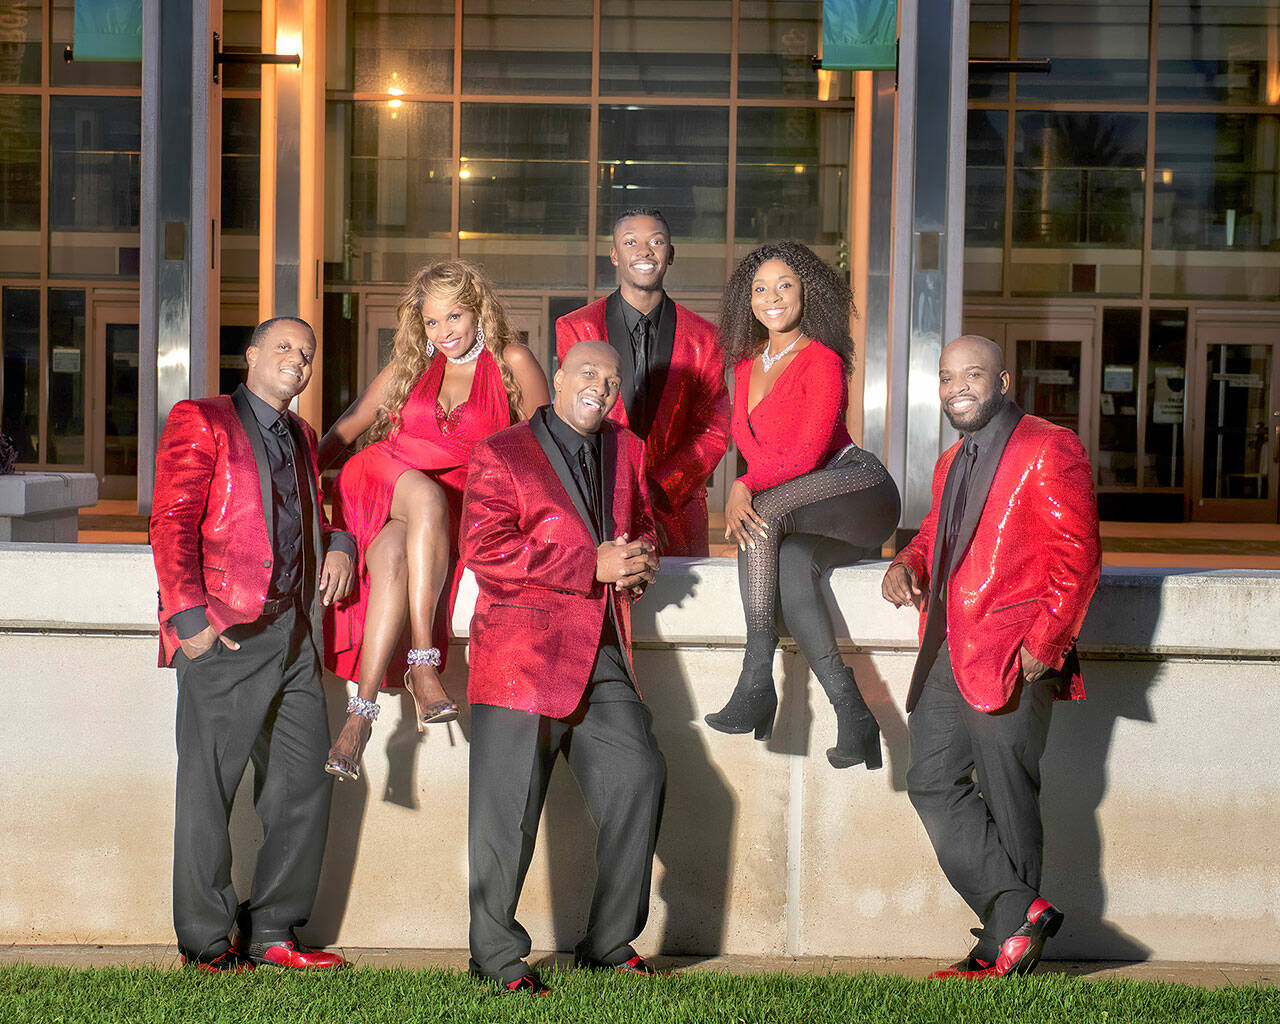 The Sounds of Soul will bring the music of Motown and beyond to Port Angeles this Friday night. From left, the vocalists are Marcus Robinson, LaTraia Savage, J.J. Johnson, Jay Camaro, Britney Moné and Johnny Hopson. Not pictured is Gloria Williams, who will fill in for Britney Moné.